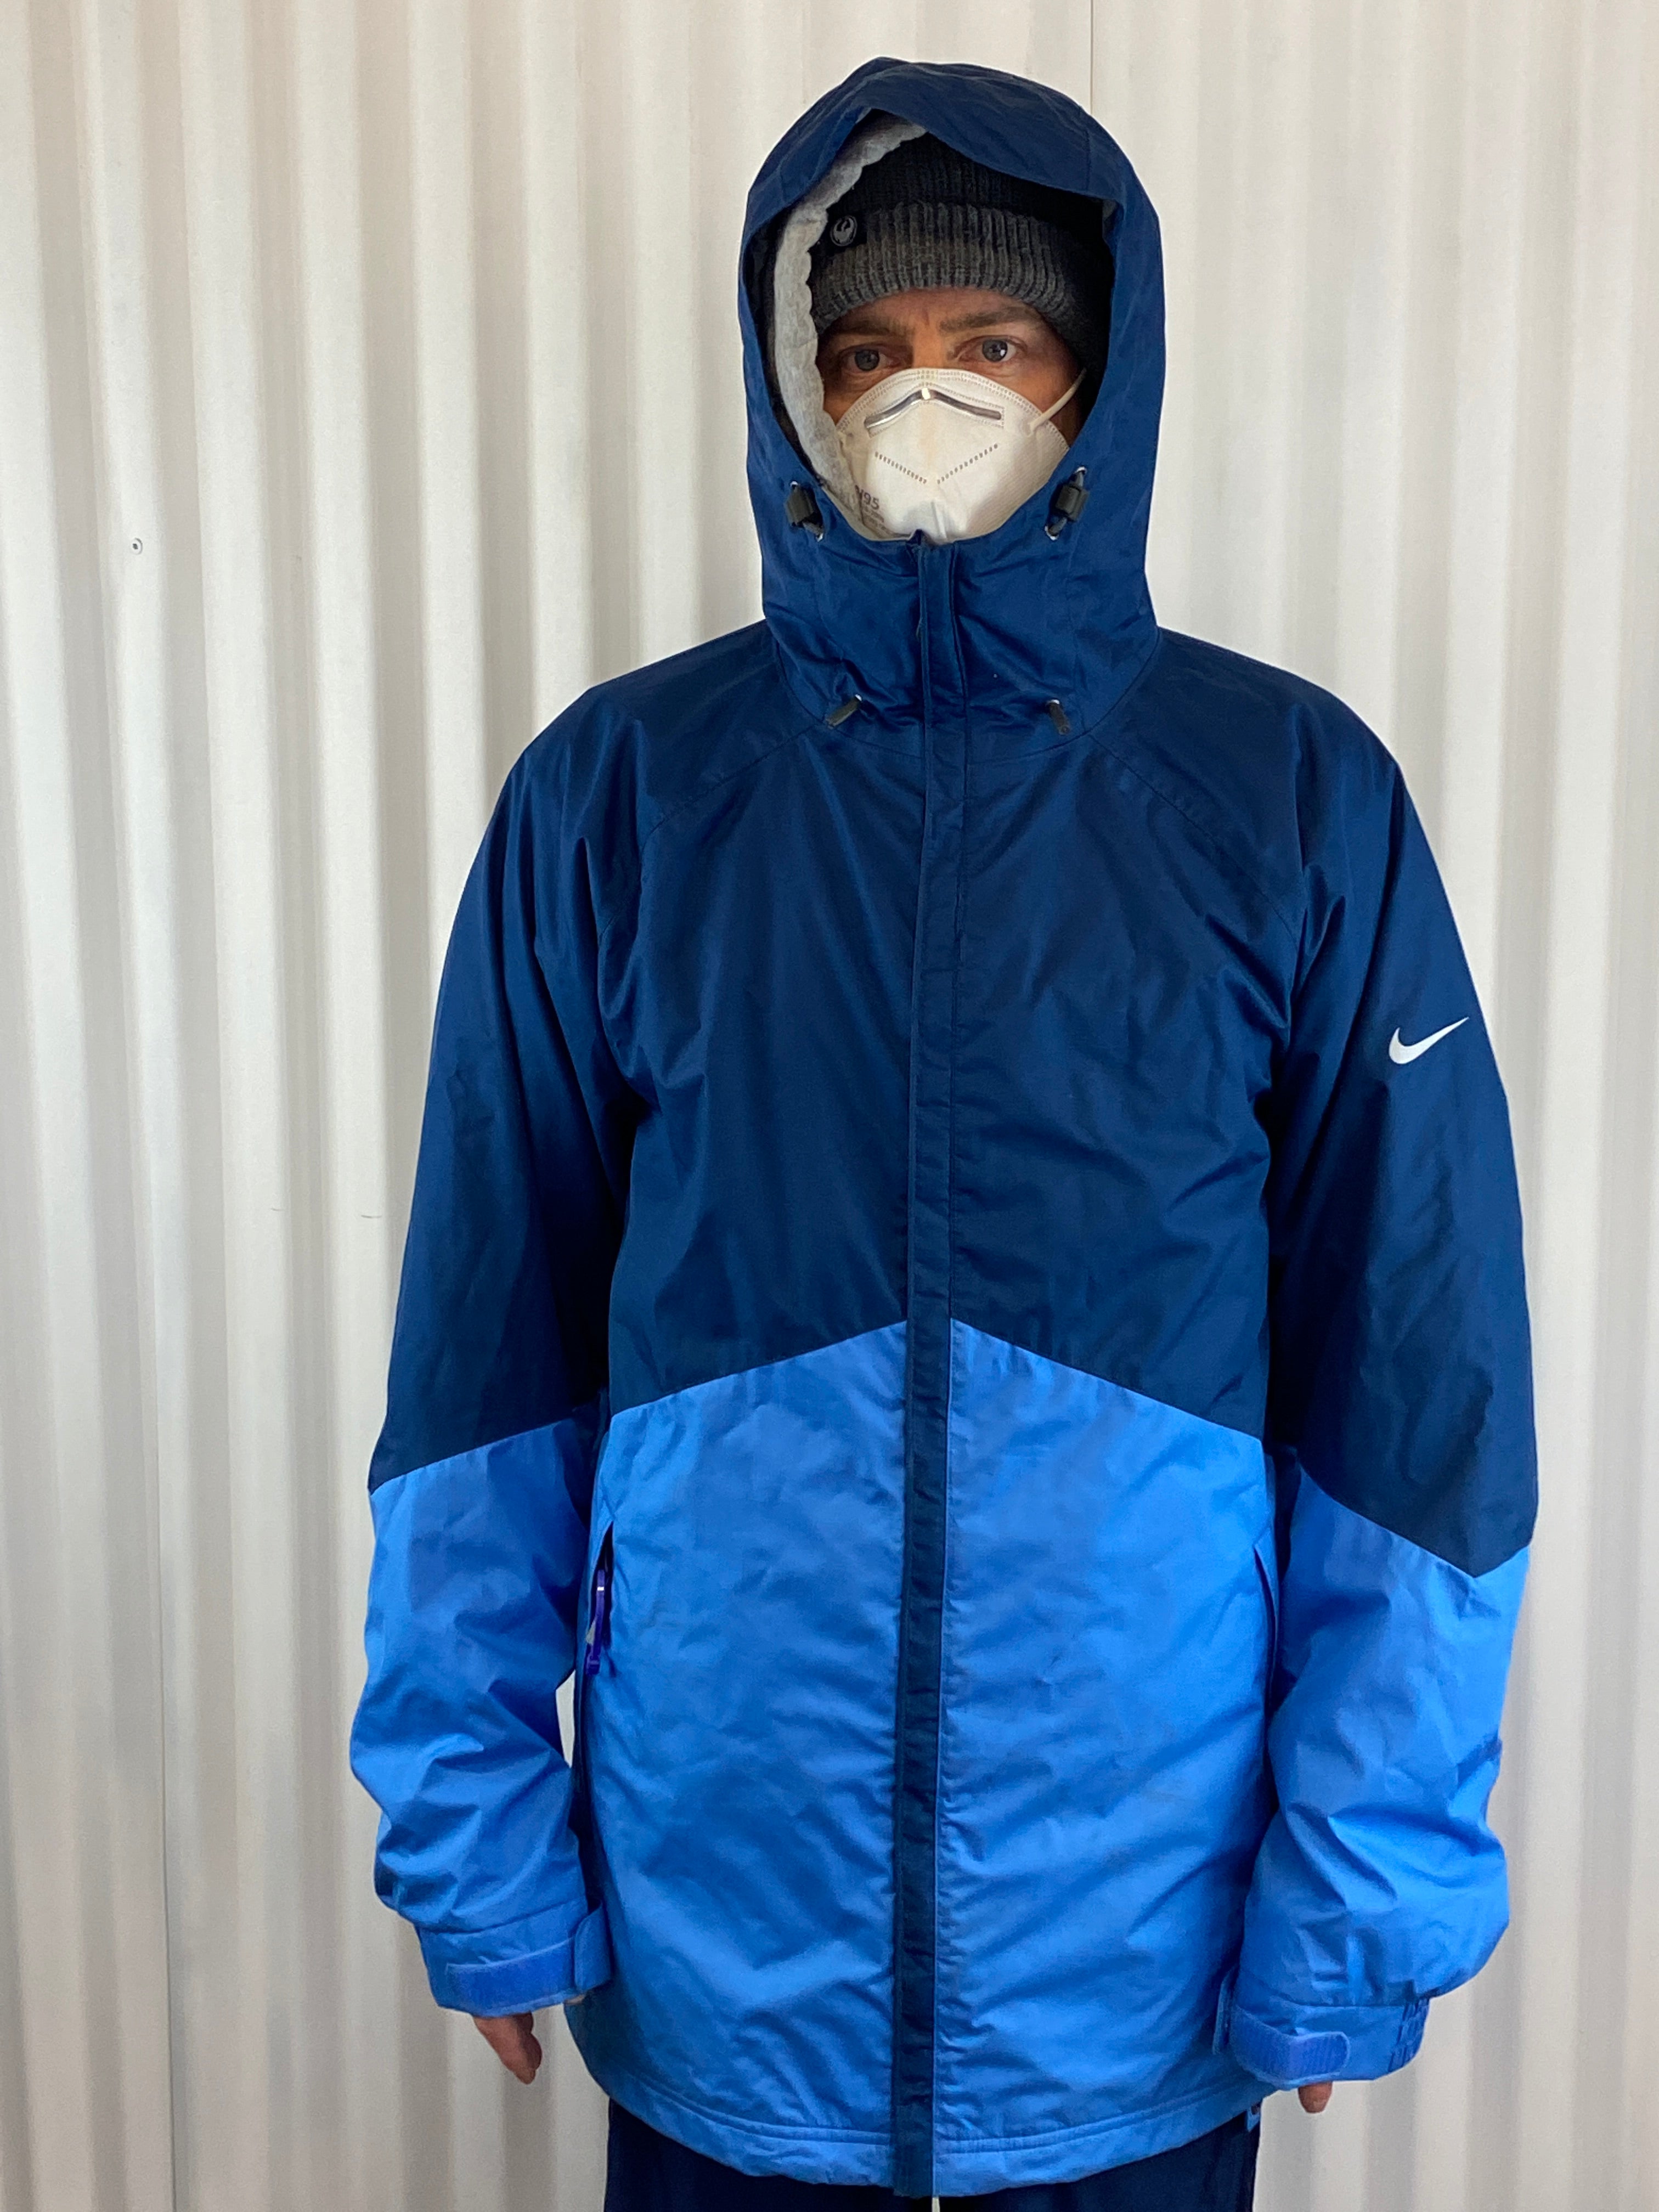 Nike Snowboard Jacket – The Locals Sale